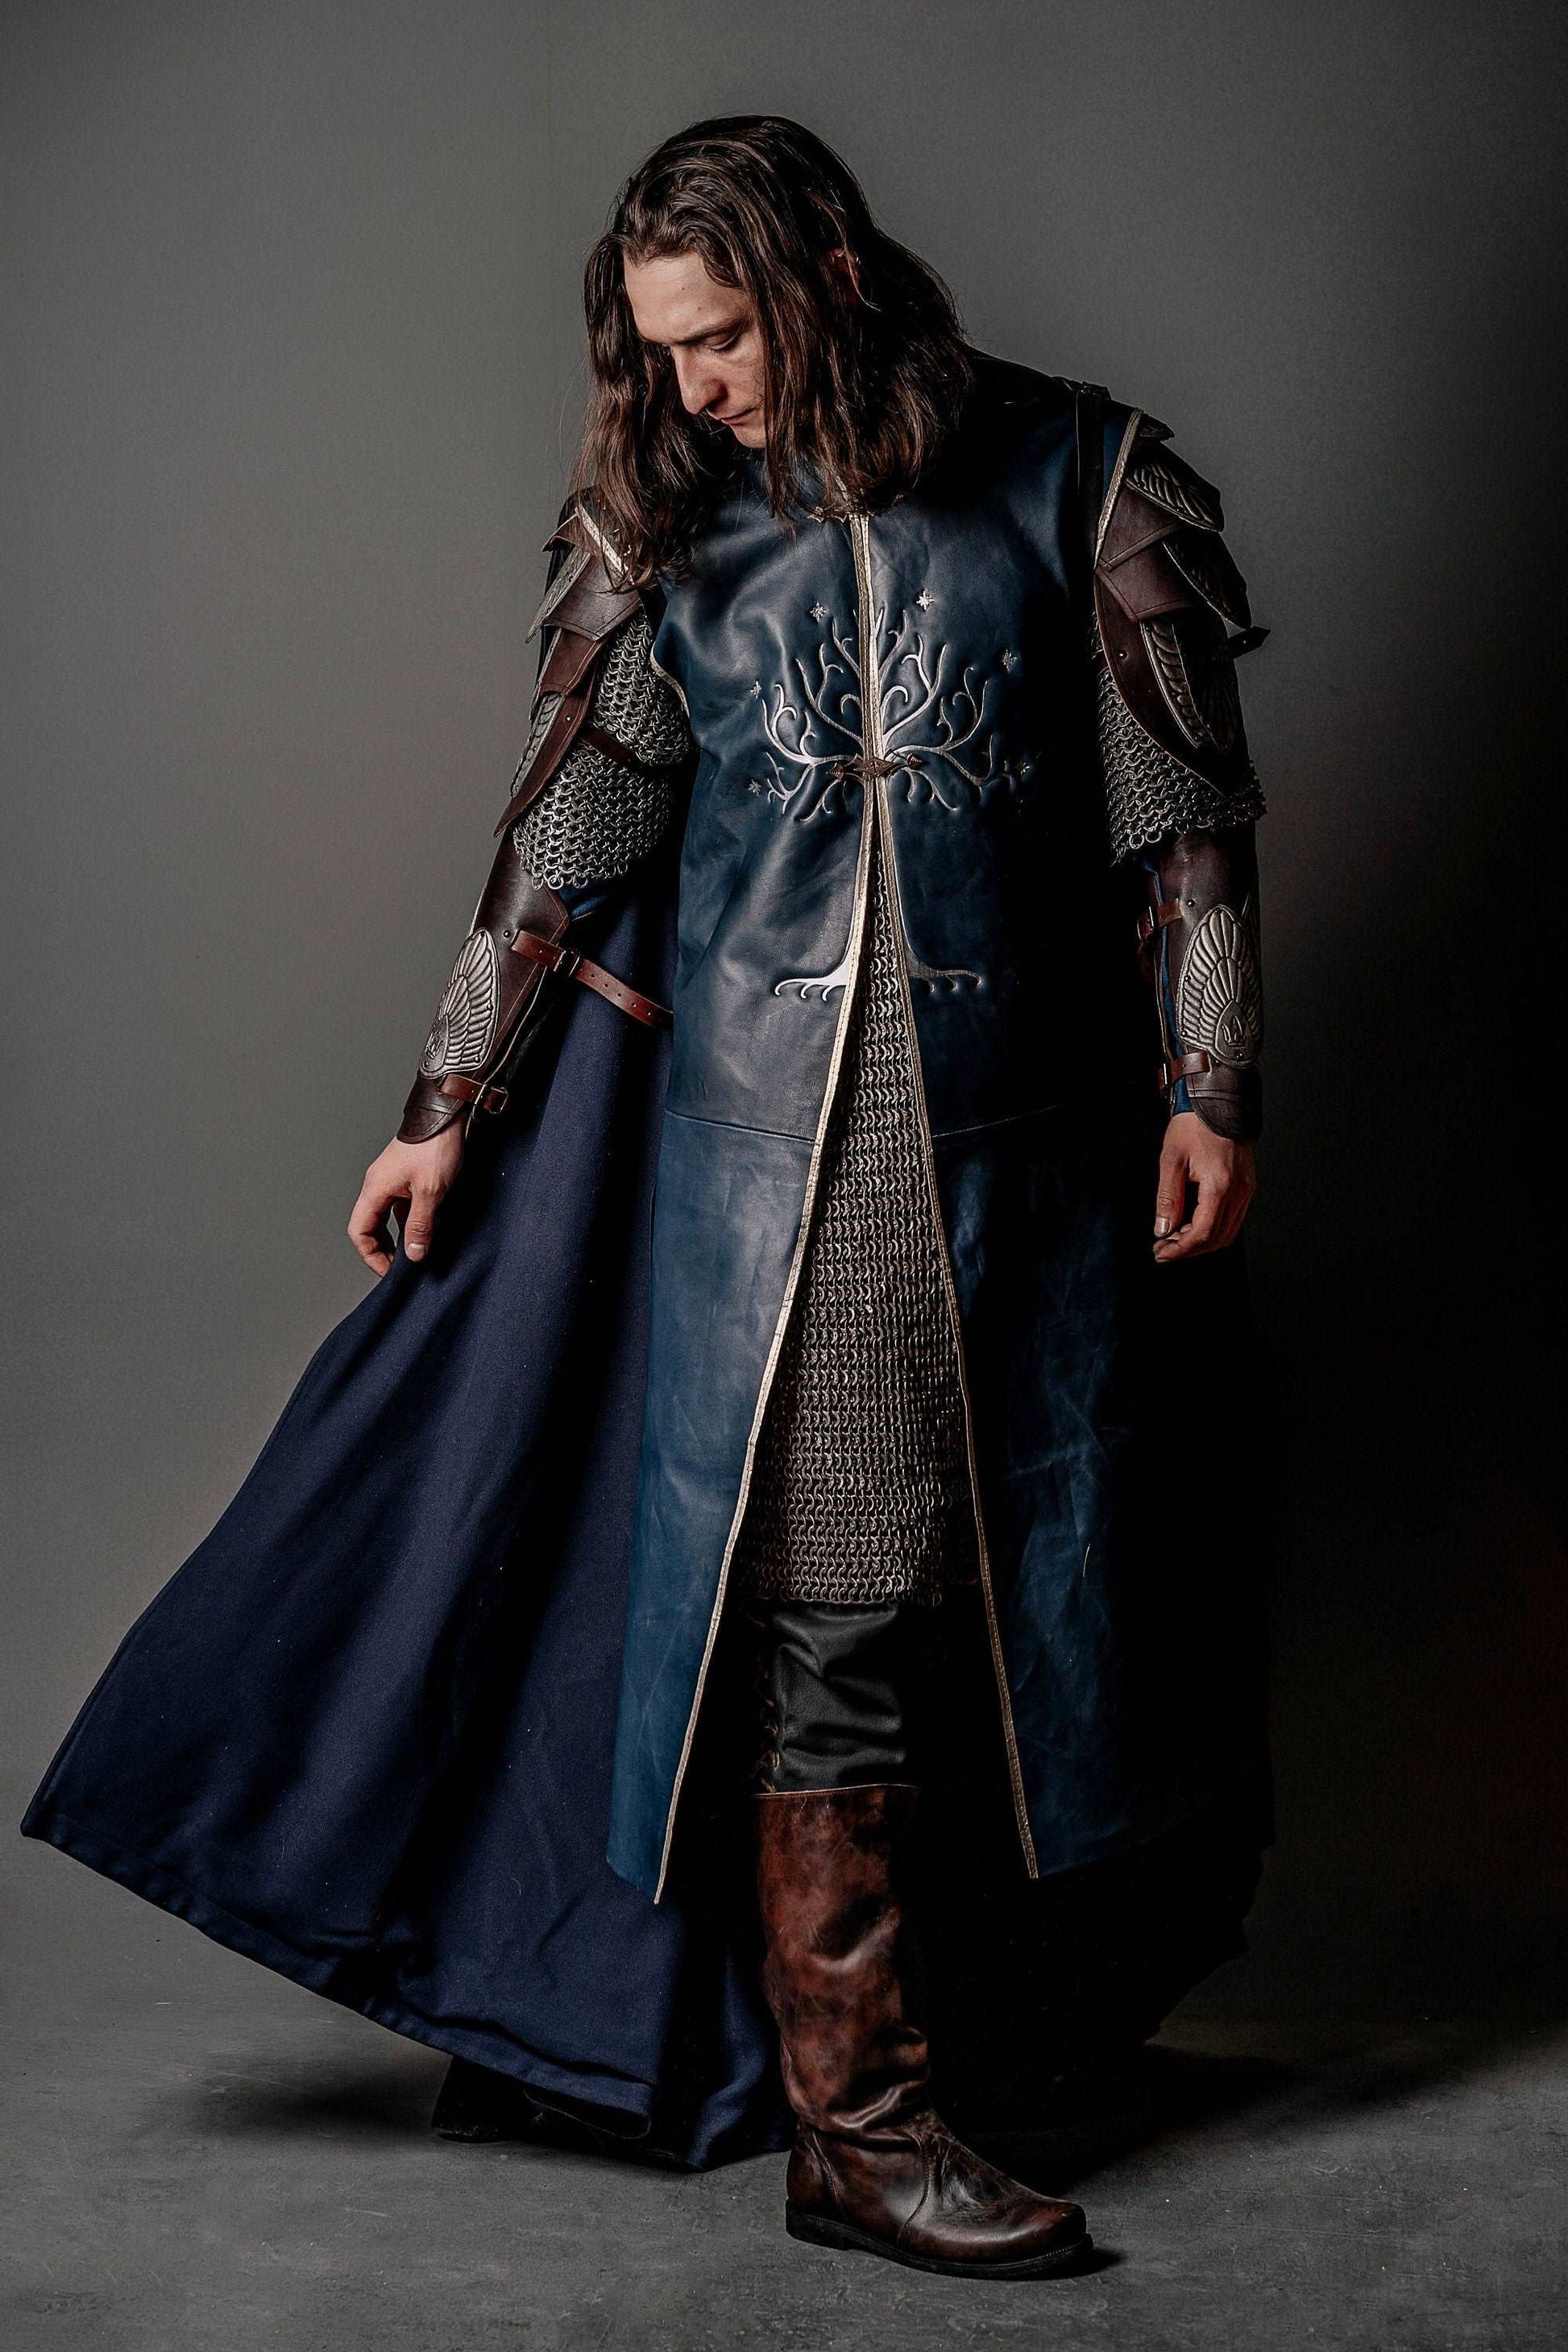 Aragorn king royal blue vest (Lord of the Rings)